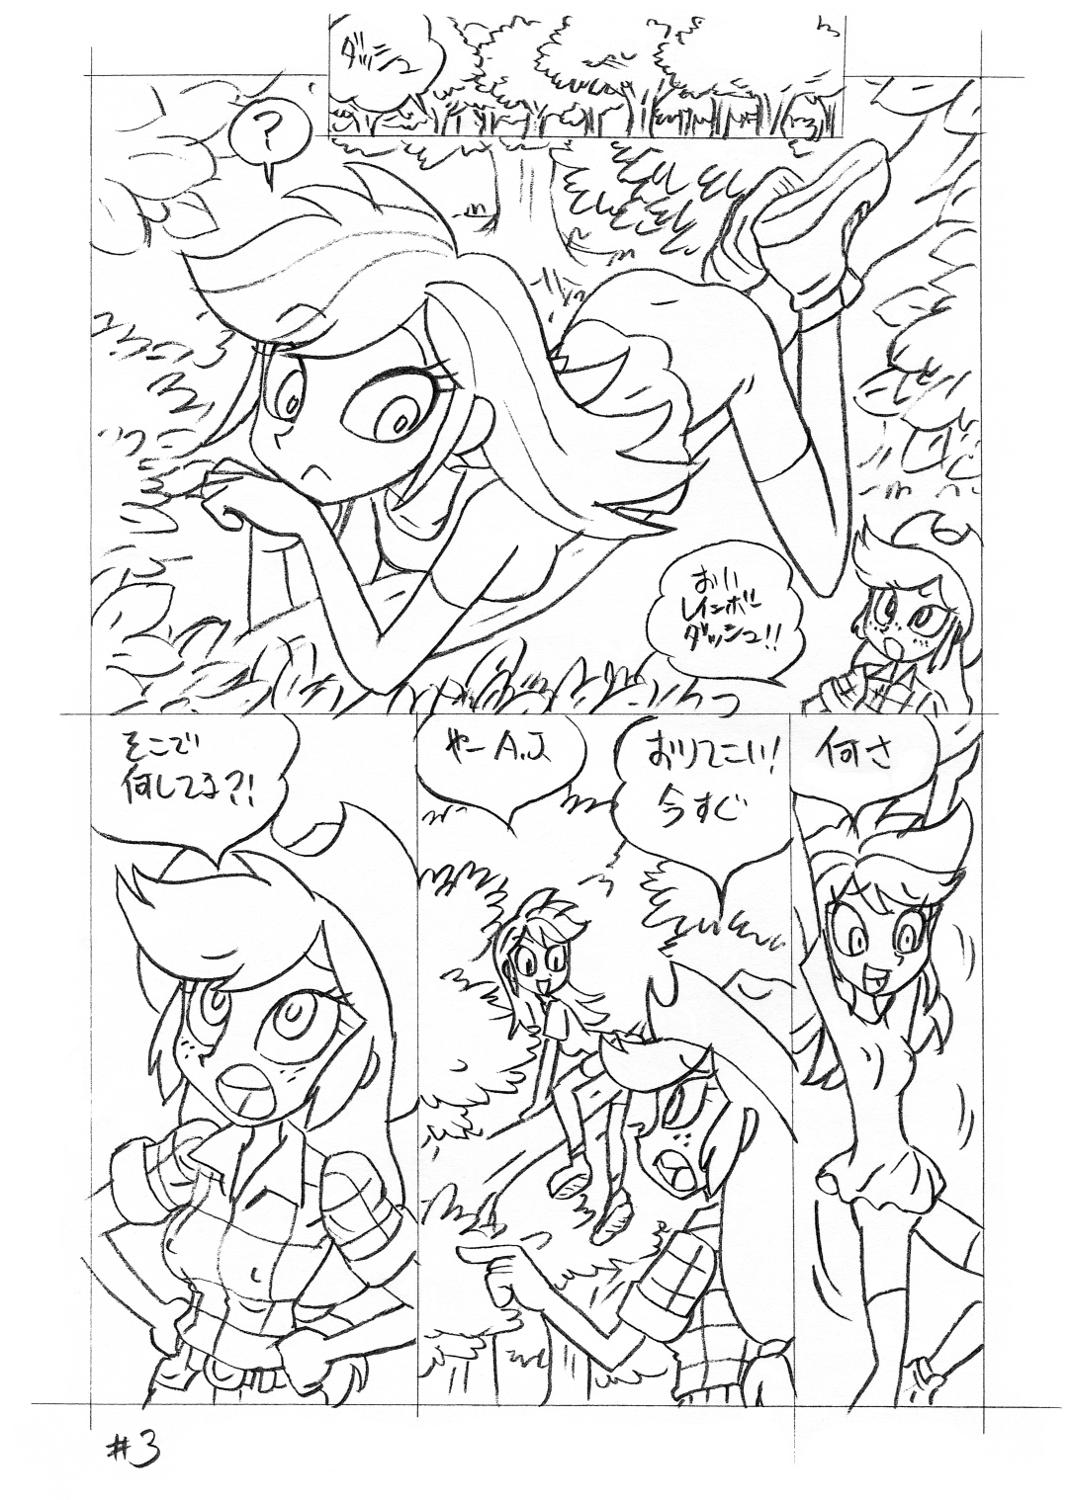 Celebrity Sex Scene Psychosomatic Counterfeit EX- A.J. in E.G. Style - My little pony friendship is magic Fuck Hard - Page 2